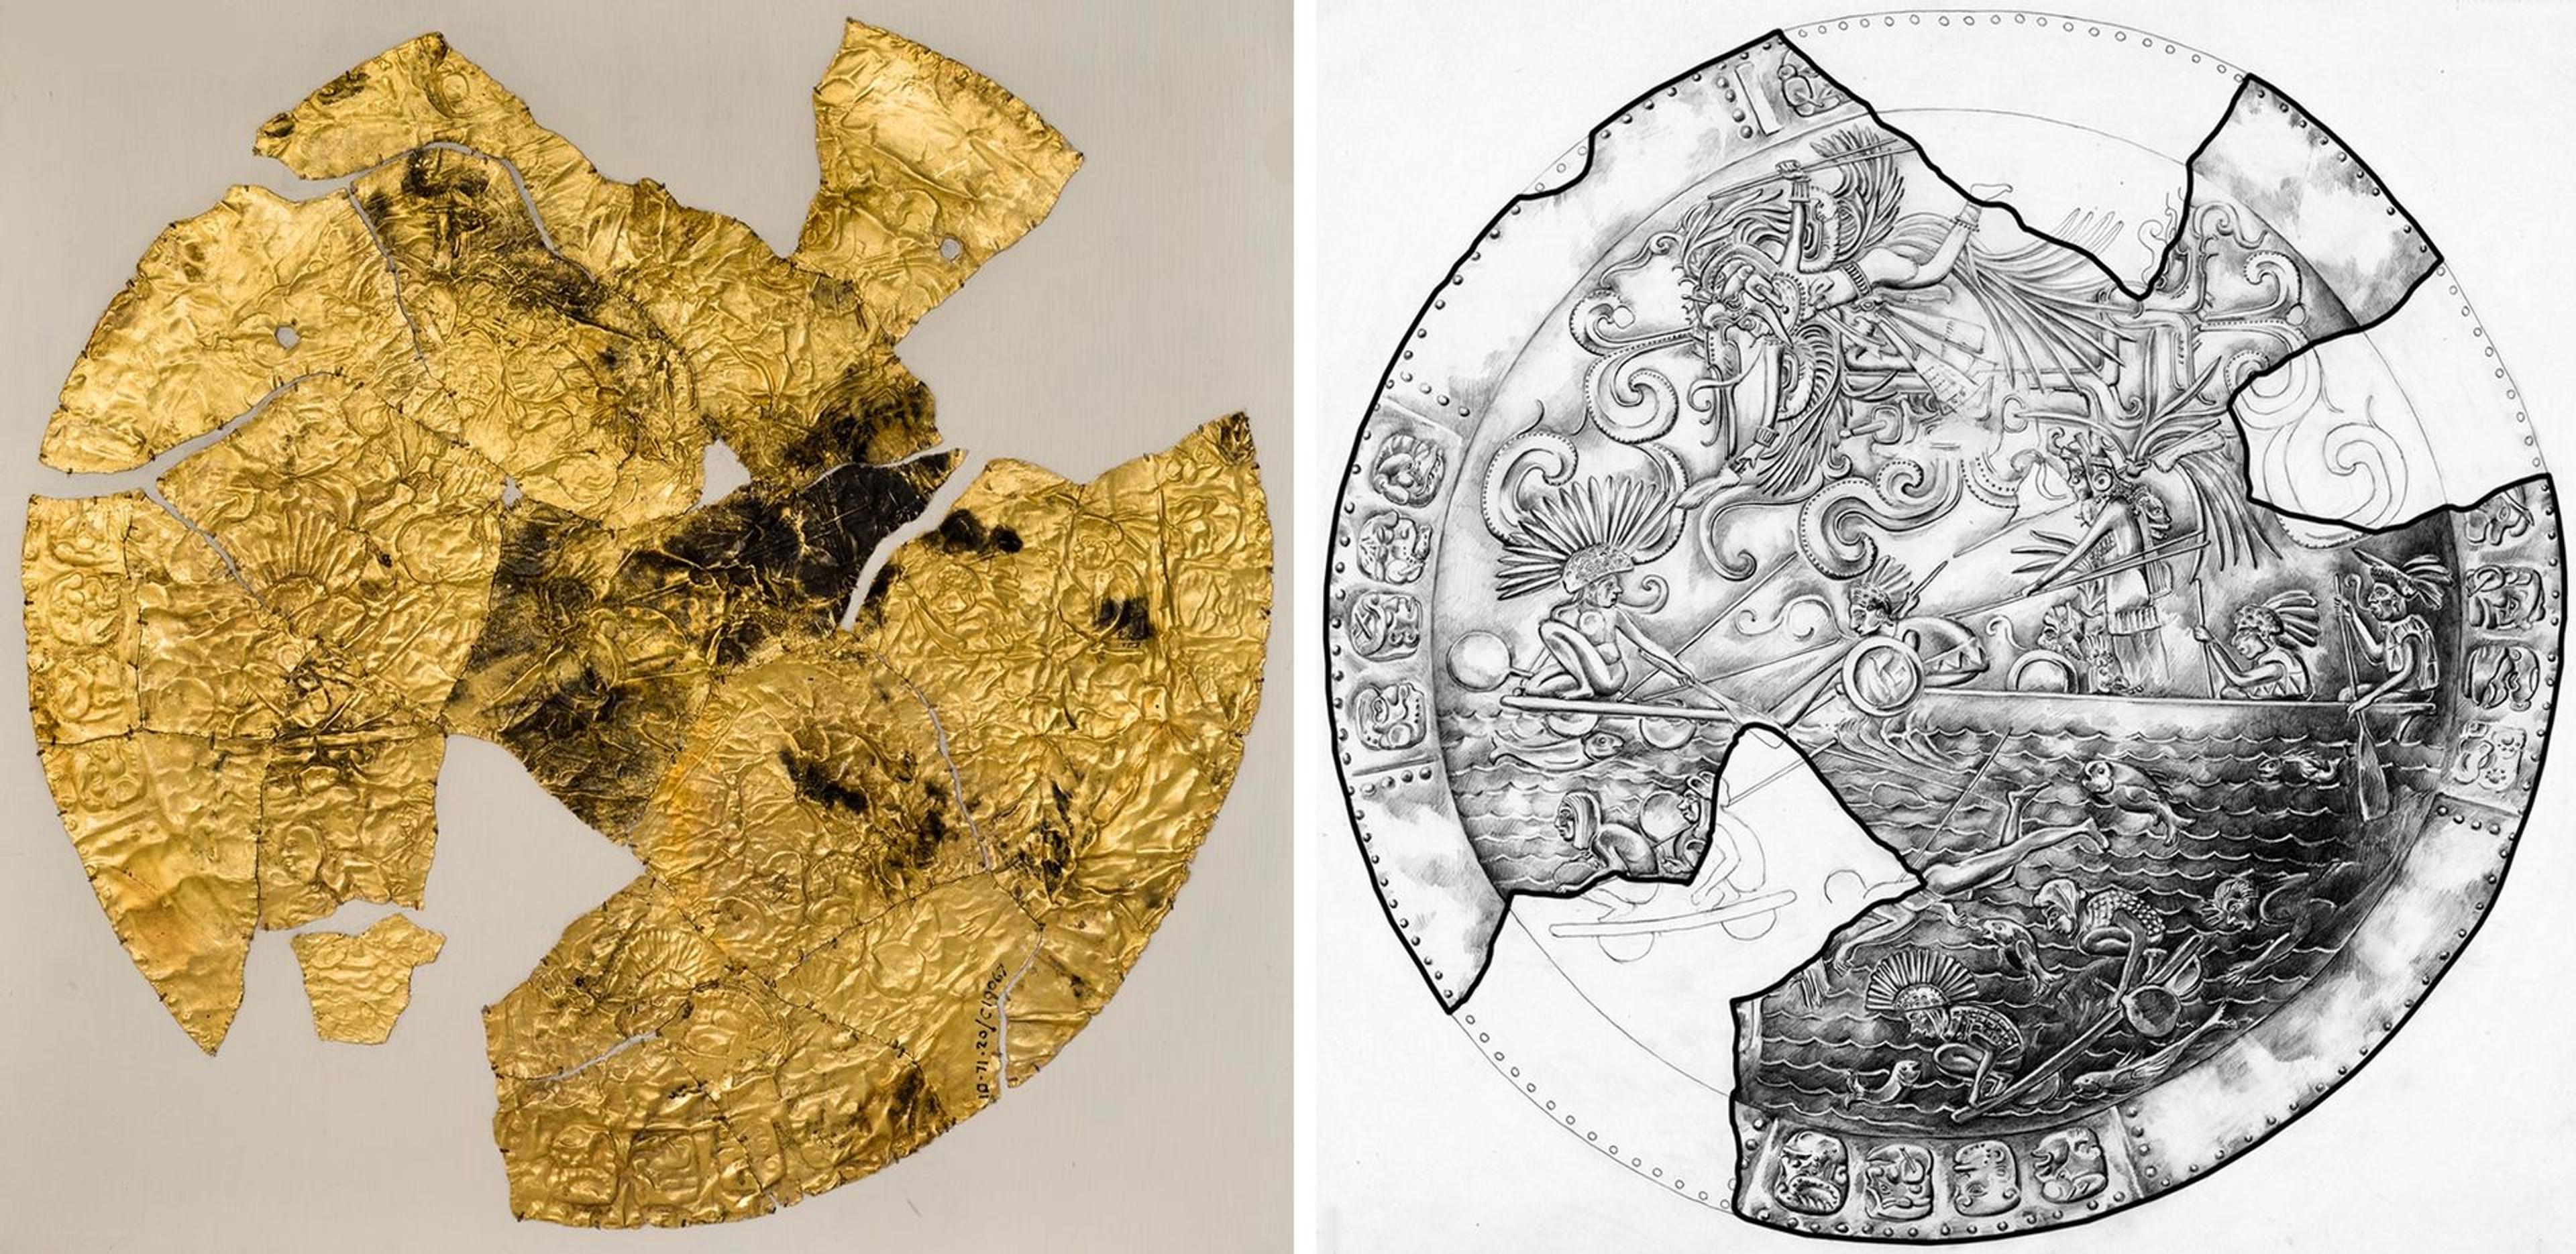 Left: Photo of a fragment of an ornamented disk recovered at the Sacred Cenote at Chichen Itza. Right: Line drawing reconstructing the original form of the disk fragment